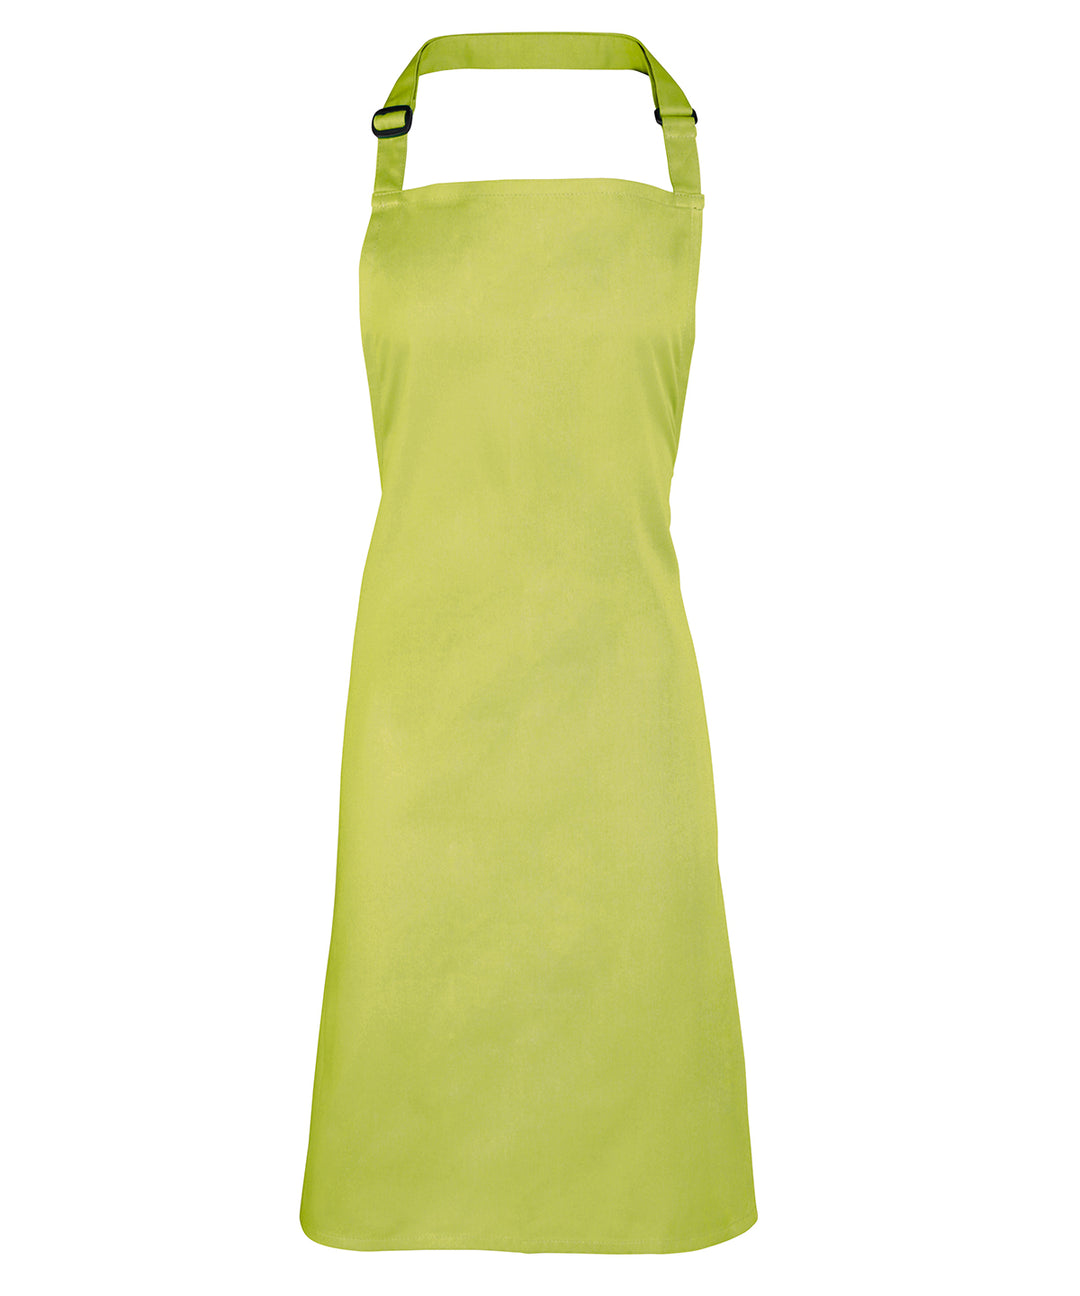 a lime green apron on a white background